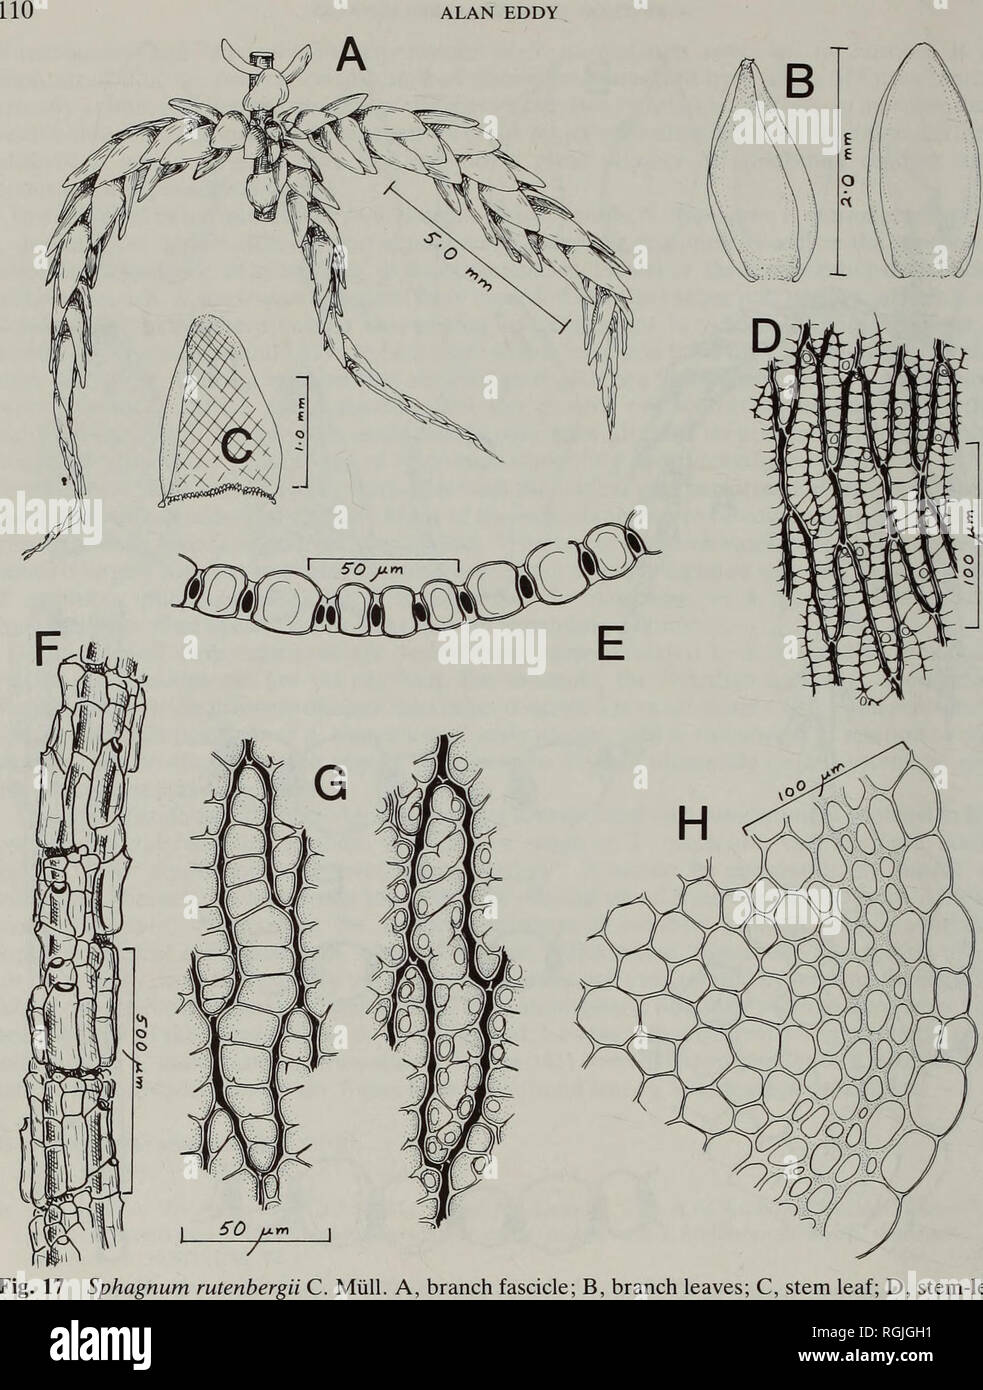 . Bulletin of the British Museum (Natural History) Botany. ALAN EDDY. Sphagnum rutenbergii C. Mull. A, branch fascicle; B, branch leaves; C, stem leaf; D, stem-leaf areolation; E, transverse section of leaf; F, branch cortex; G, adaxial (left) and abaxial (right) surfaces of branch leaf; H, transverse section of stem (all drawn from the type collection of 5. obovatum). frequently with faint pores or thinnings; internal cylinder rather well developed, pale except for a narrow band adjacent to the hyaloderm which is usually a rich red-brown. Branch cortex weakly to moderately dimorphic, retort c Stock Photo